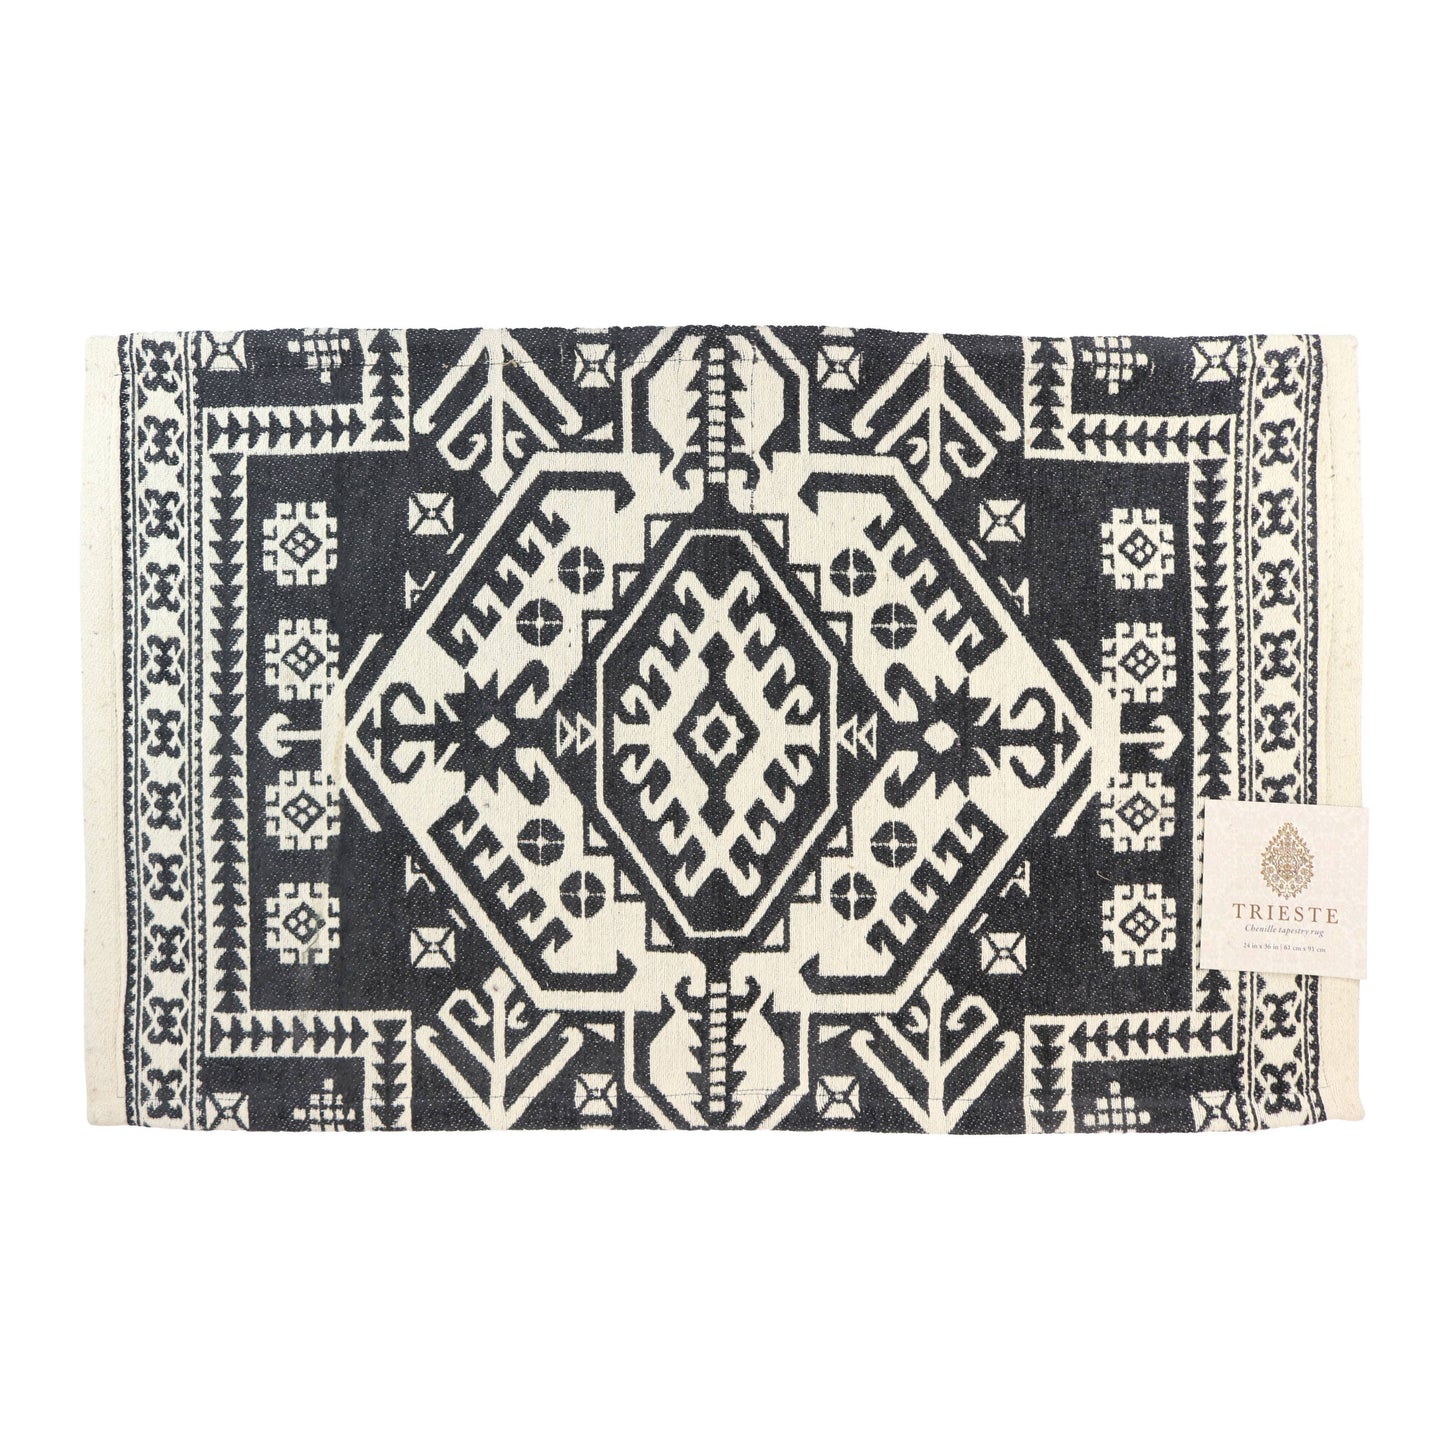 Trieste Area Rugs - Size Options - Cotton - Assorted Styles: 27x45 in